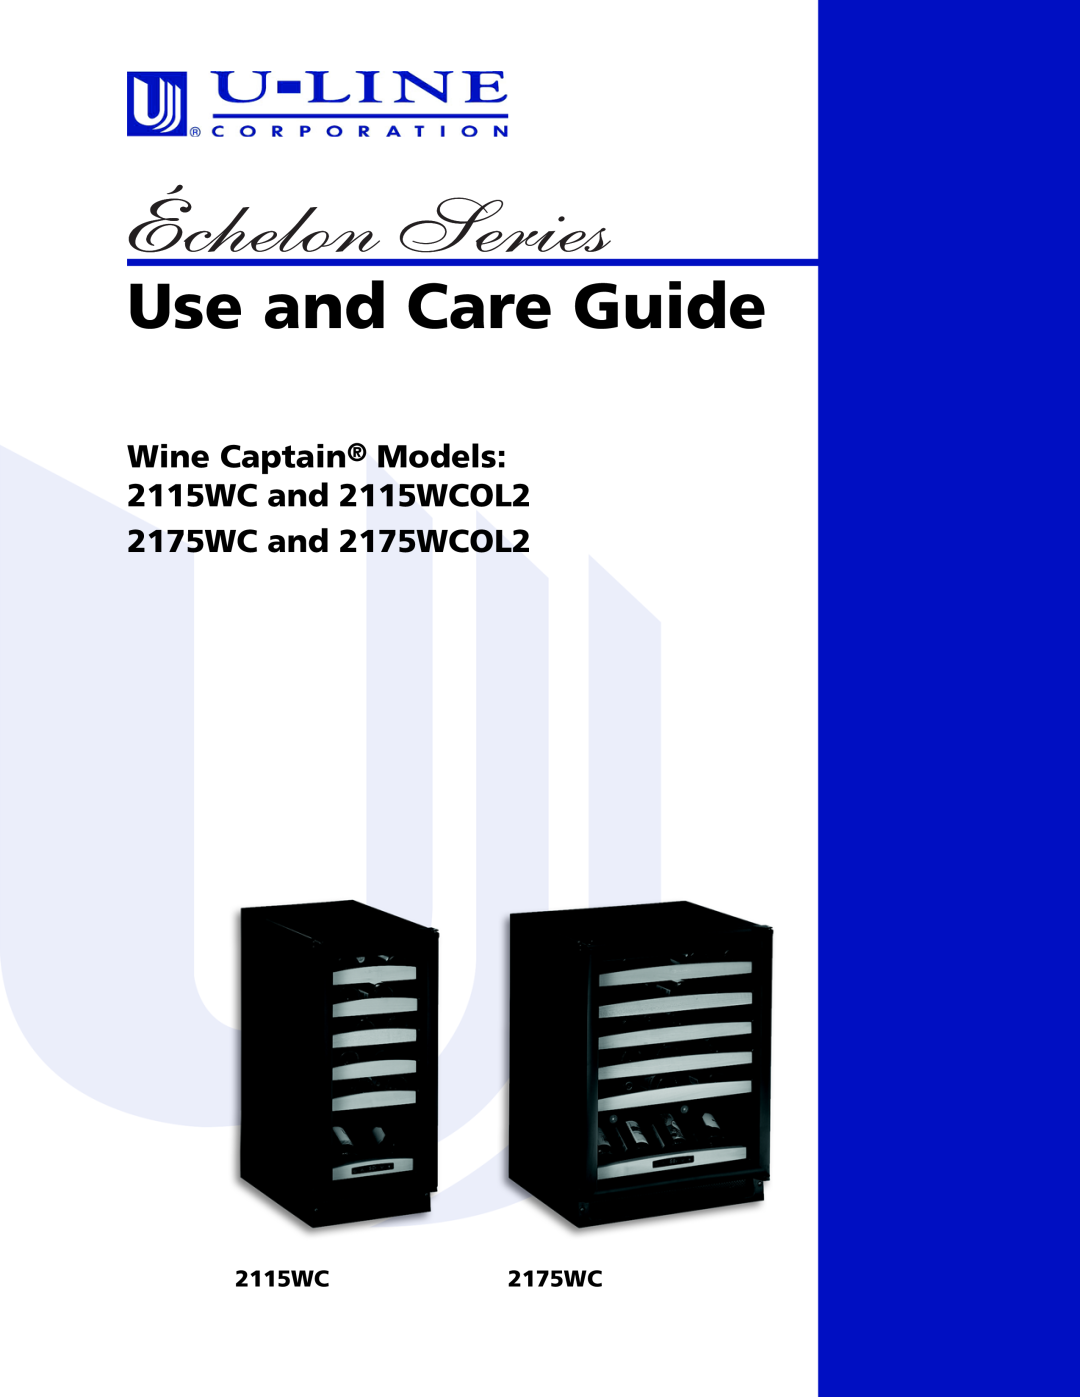 U-Line manual 2115WC2175WC, Use and Care Guide, Wine Captain Models 2115WC and 2115WCOL2 2175WC and 2175WCOL2 